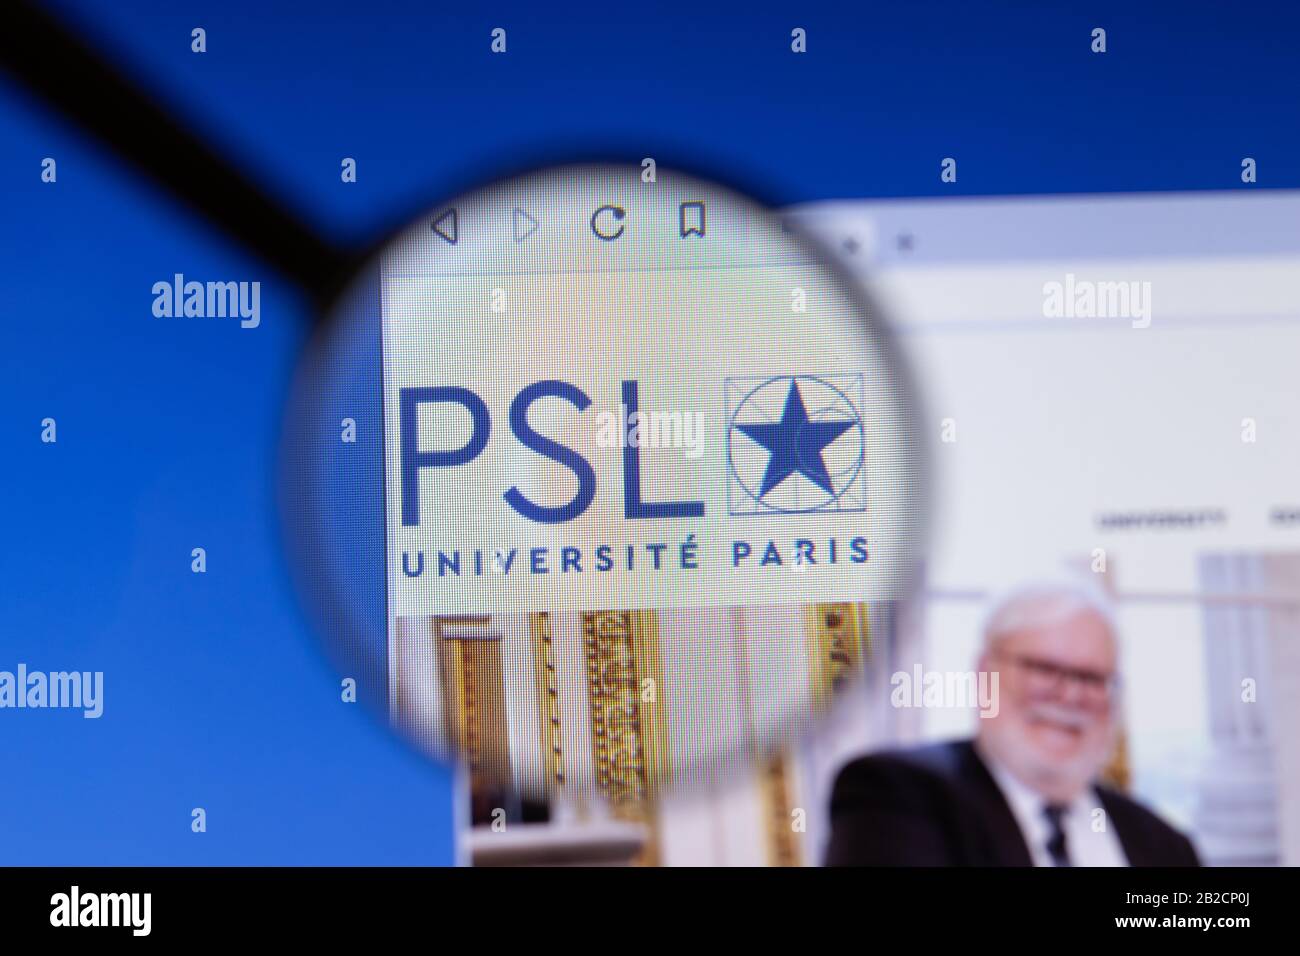 Los Angeles, California, USA - 3 March 2020: Universite PSL website homepage logo visible on display screen, Illustrative Editorial Stock Photo